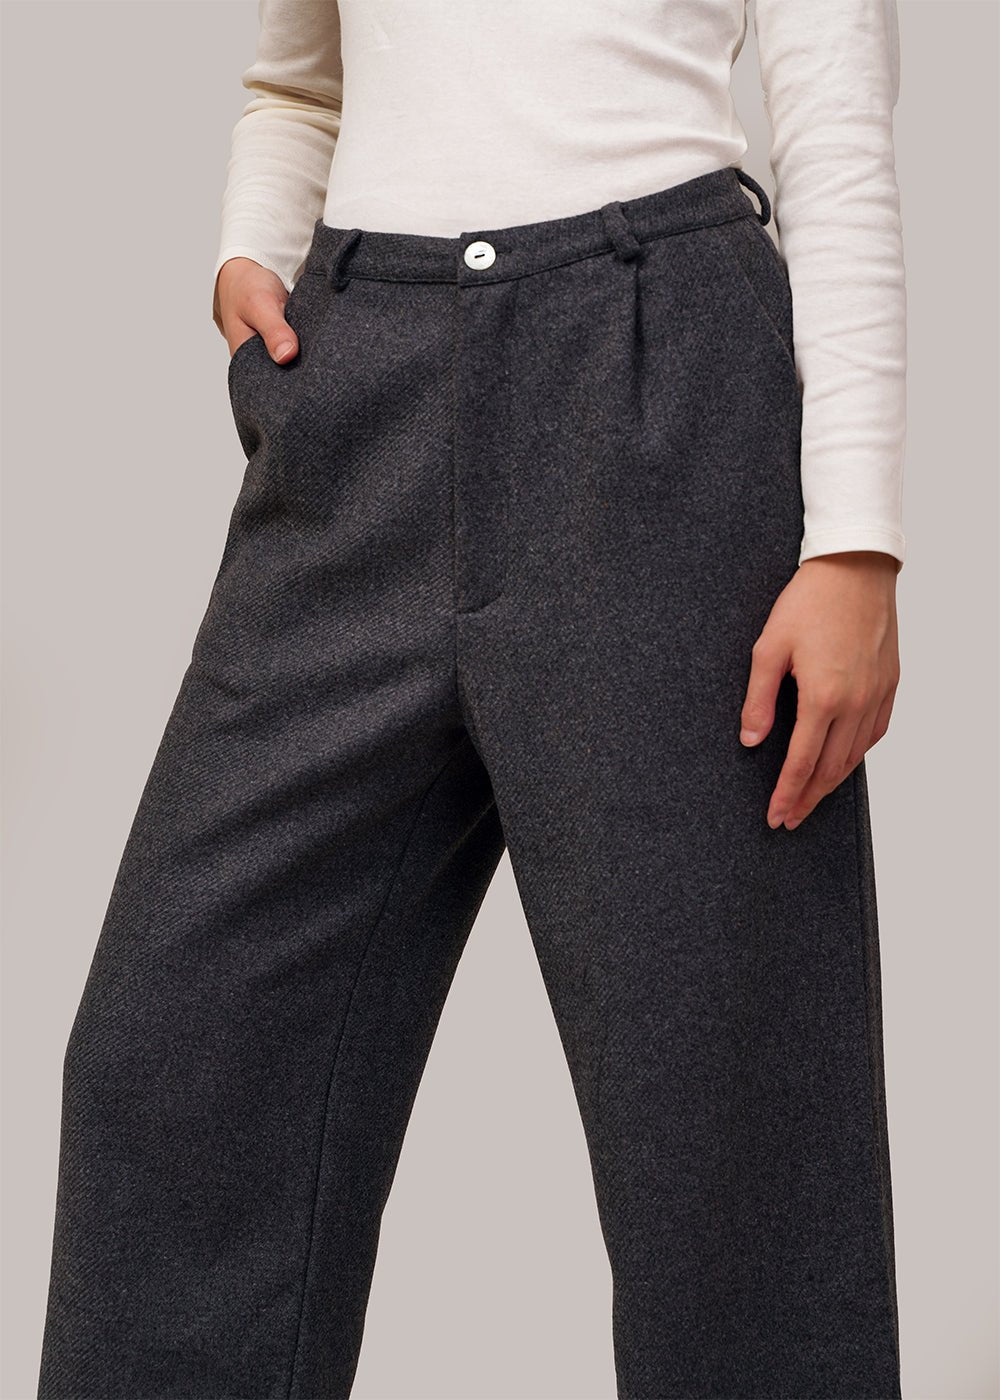 Liv Flannel Pants in Grey by BY SIGNE – New Classics Studios